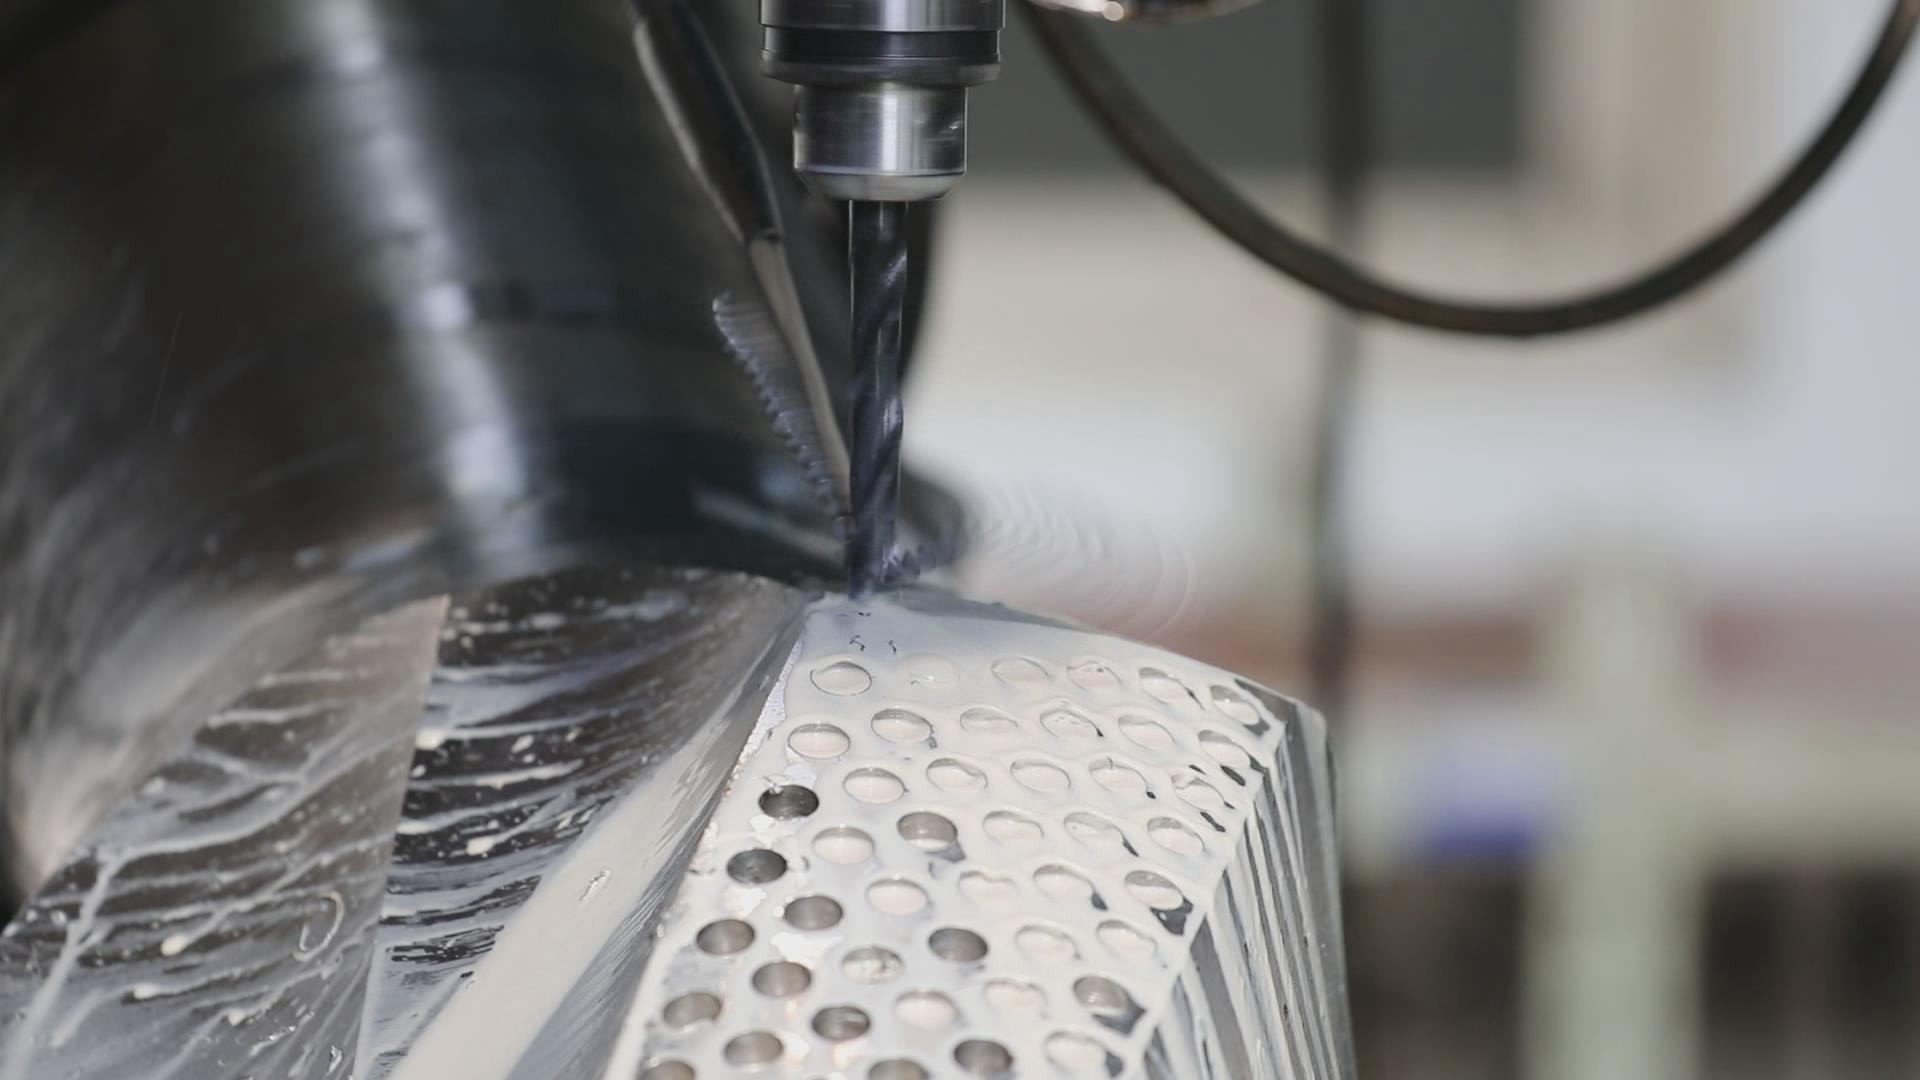 Stabilizer is machining alloy holes